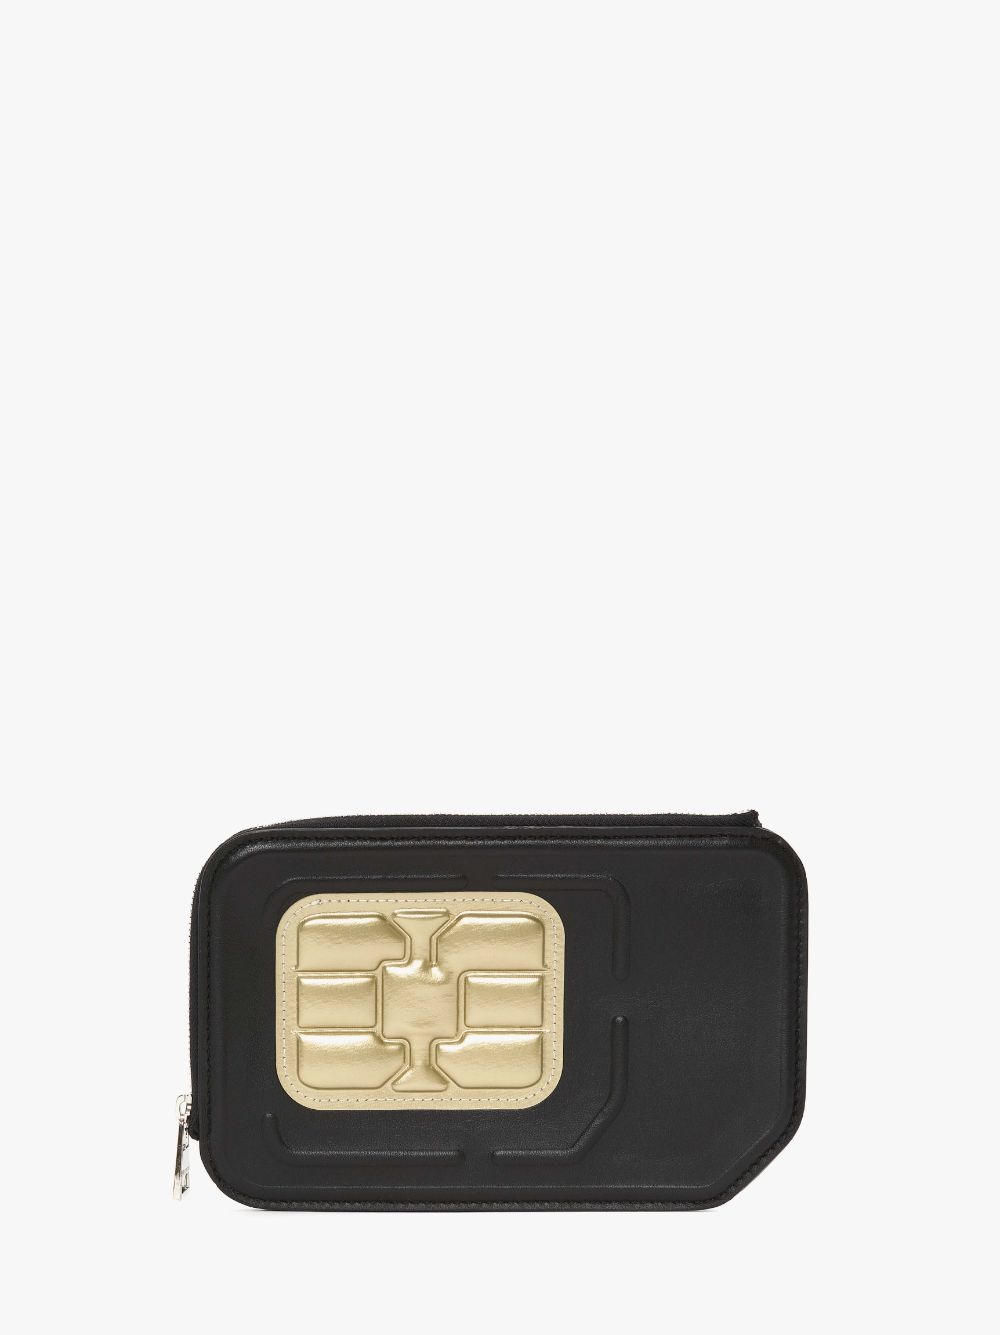 A4 LEATHER SIM CARD POUCH - 1